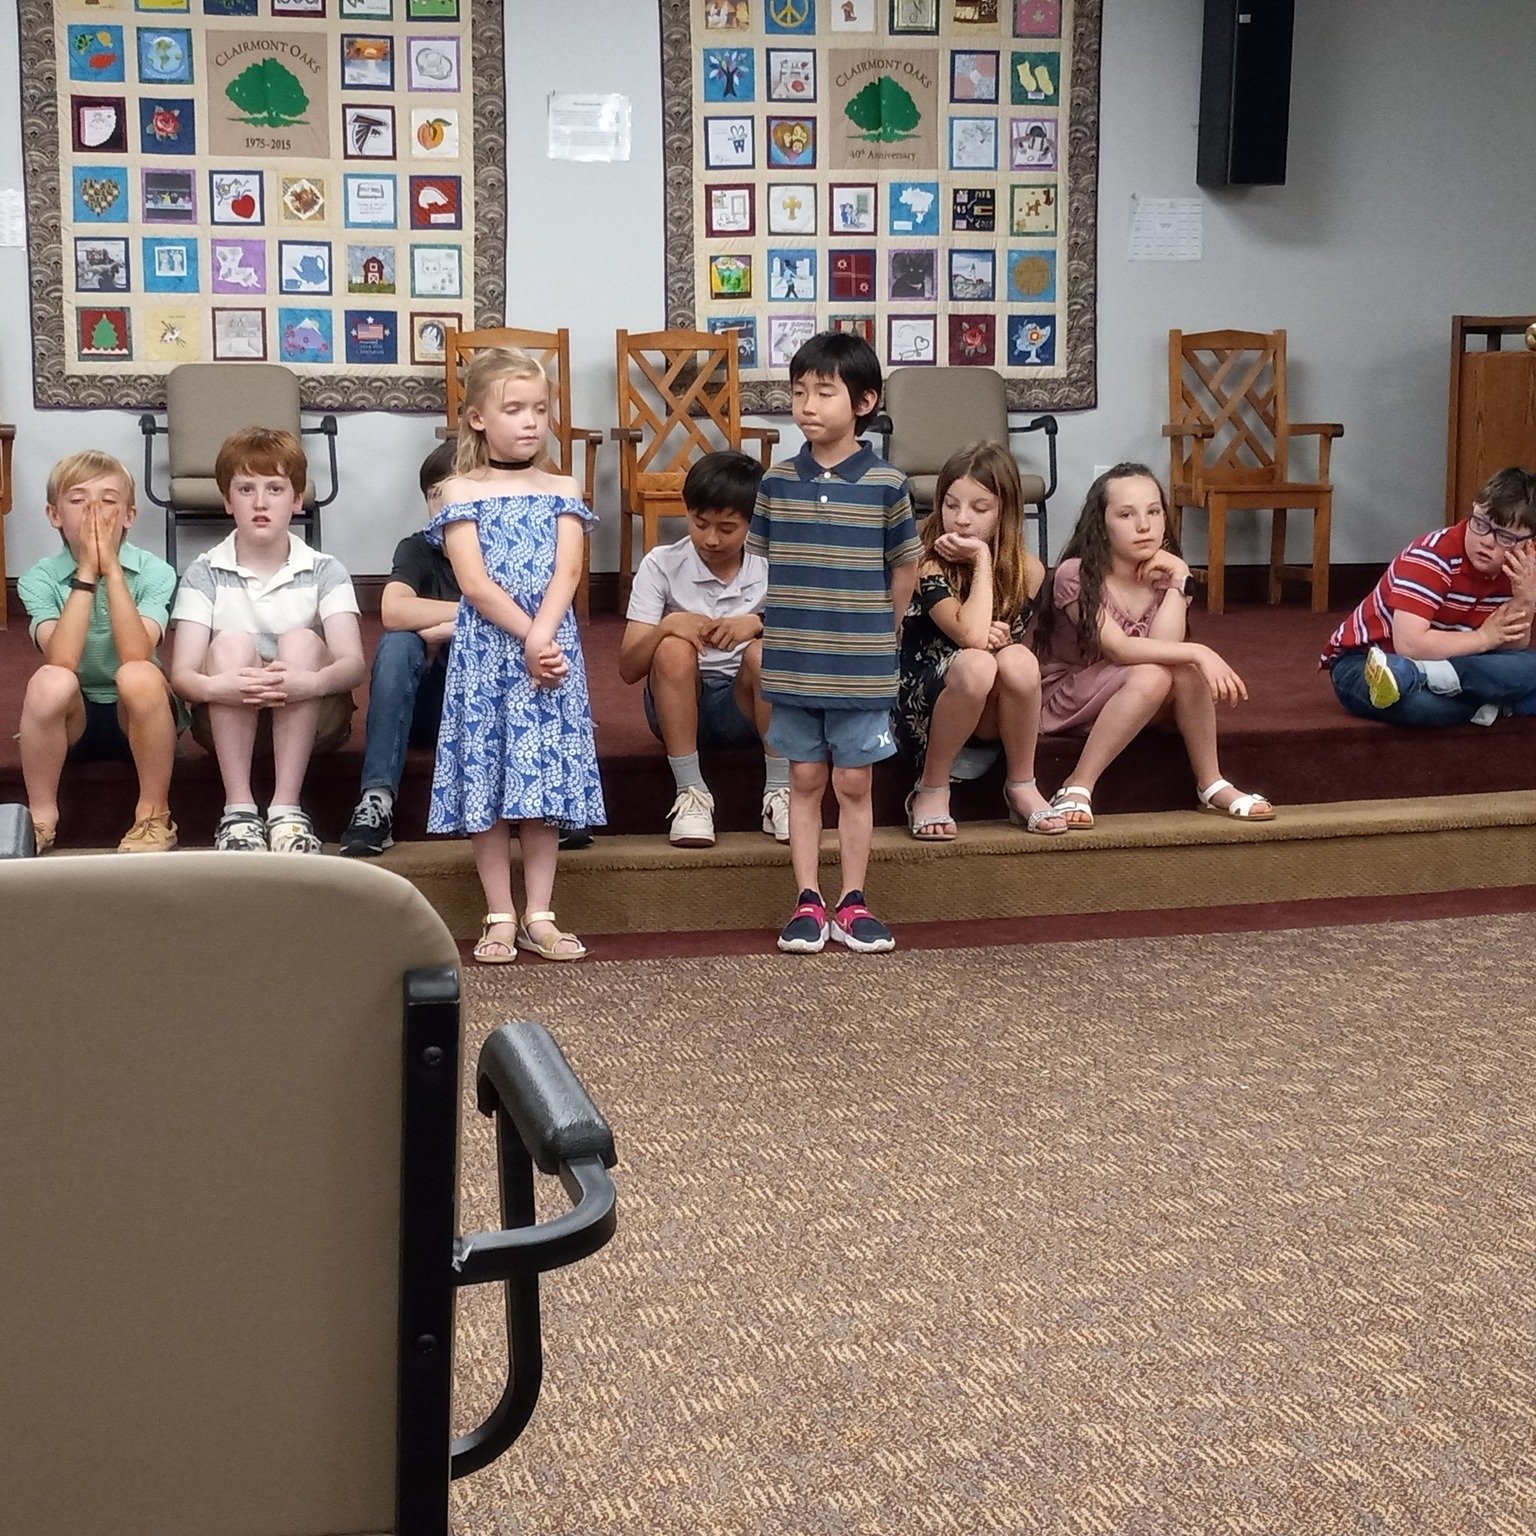 On Sunday the Hosanna choir sang at Clairmont Oaks! All the kids did a fantastic job, and the residents were so complimentary of their music. Thank you Mr. Neil for organizing this excursion! 🎼🌿🌻